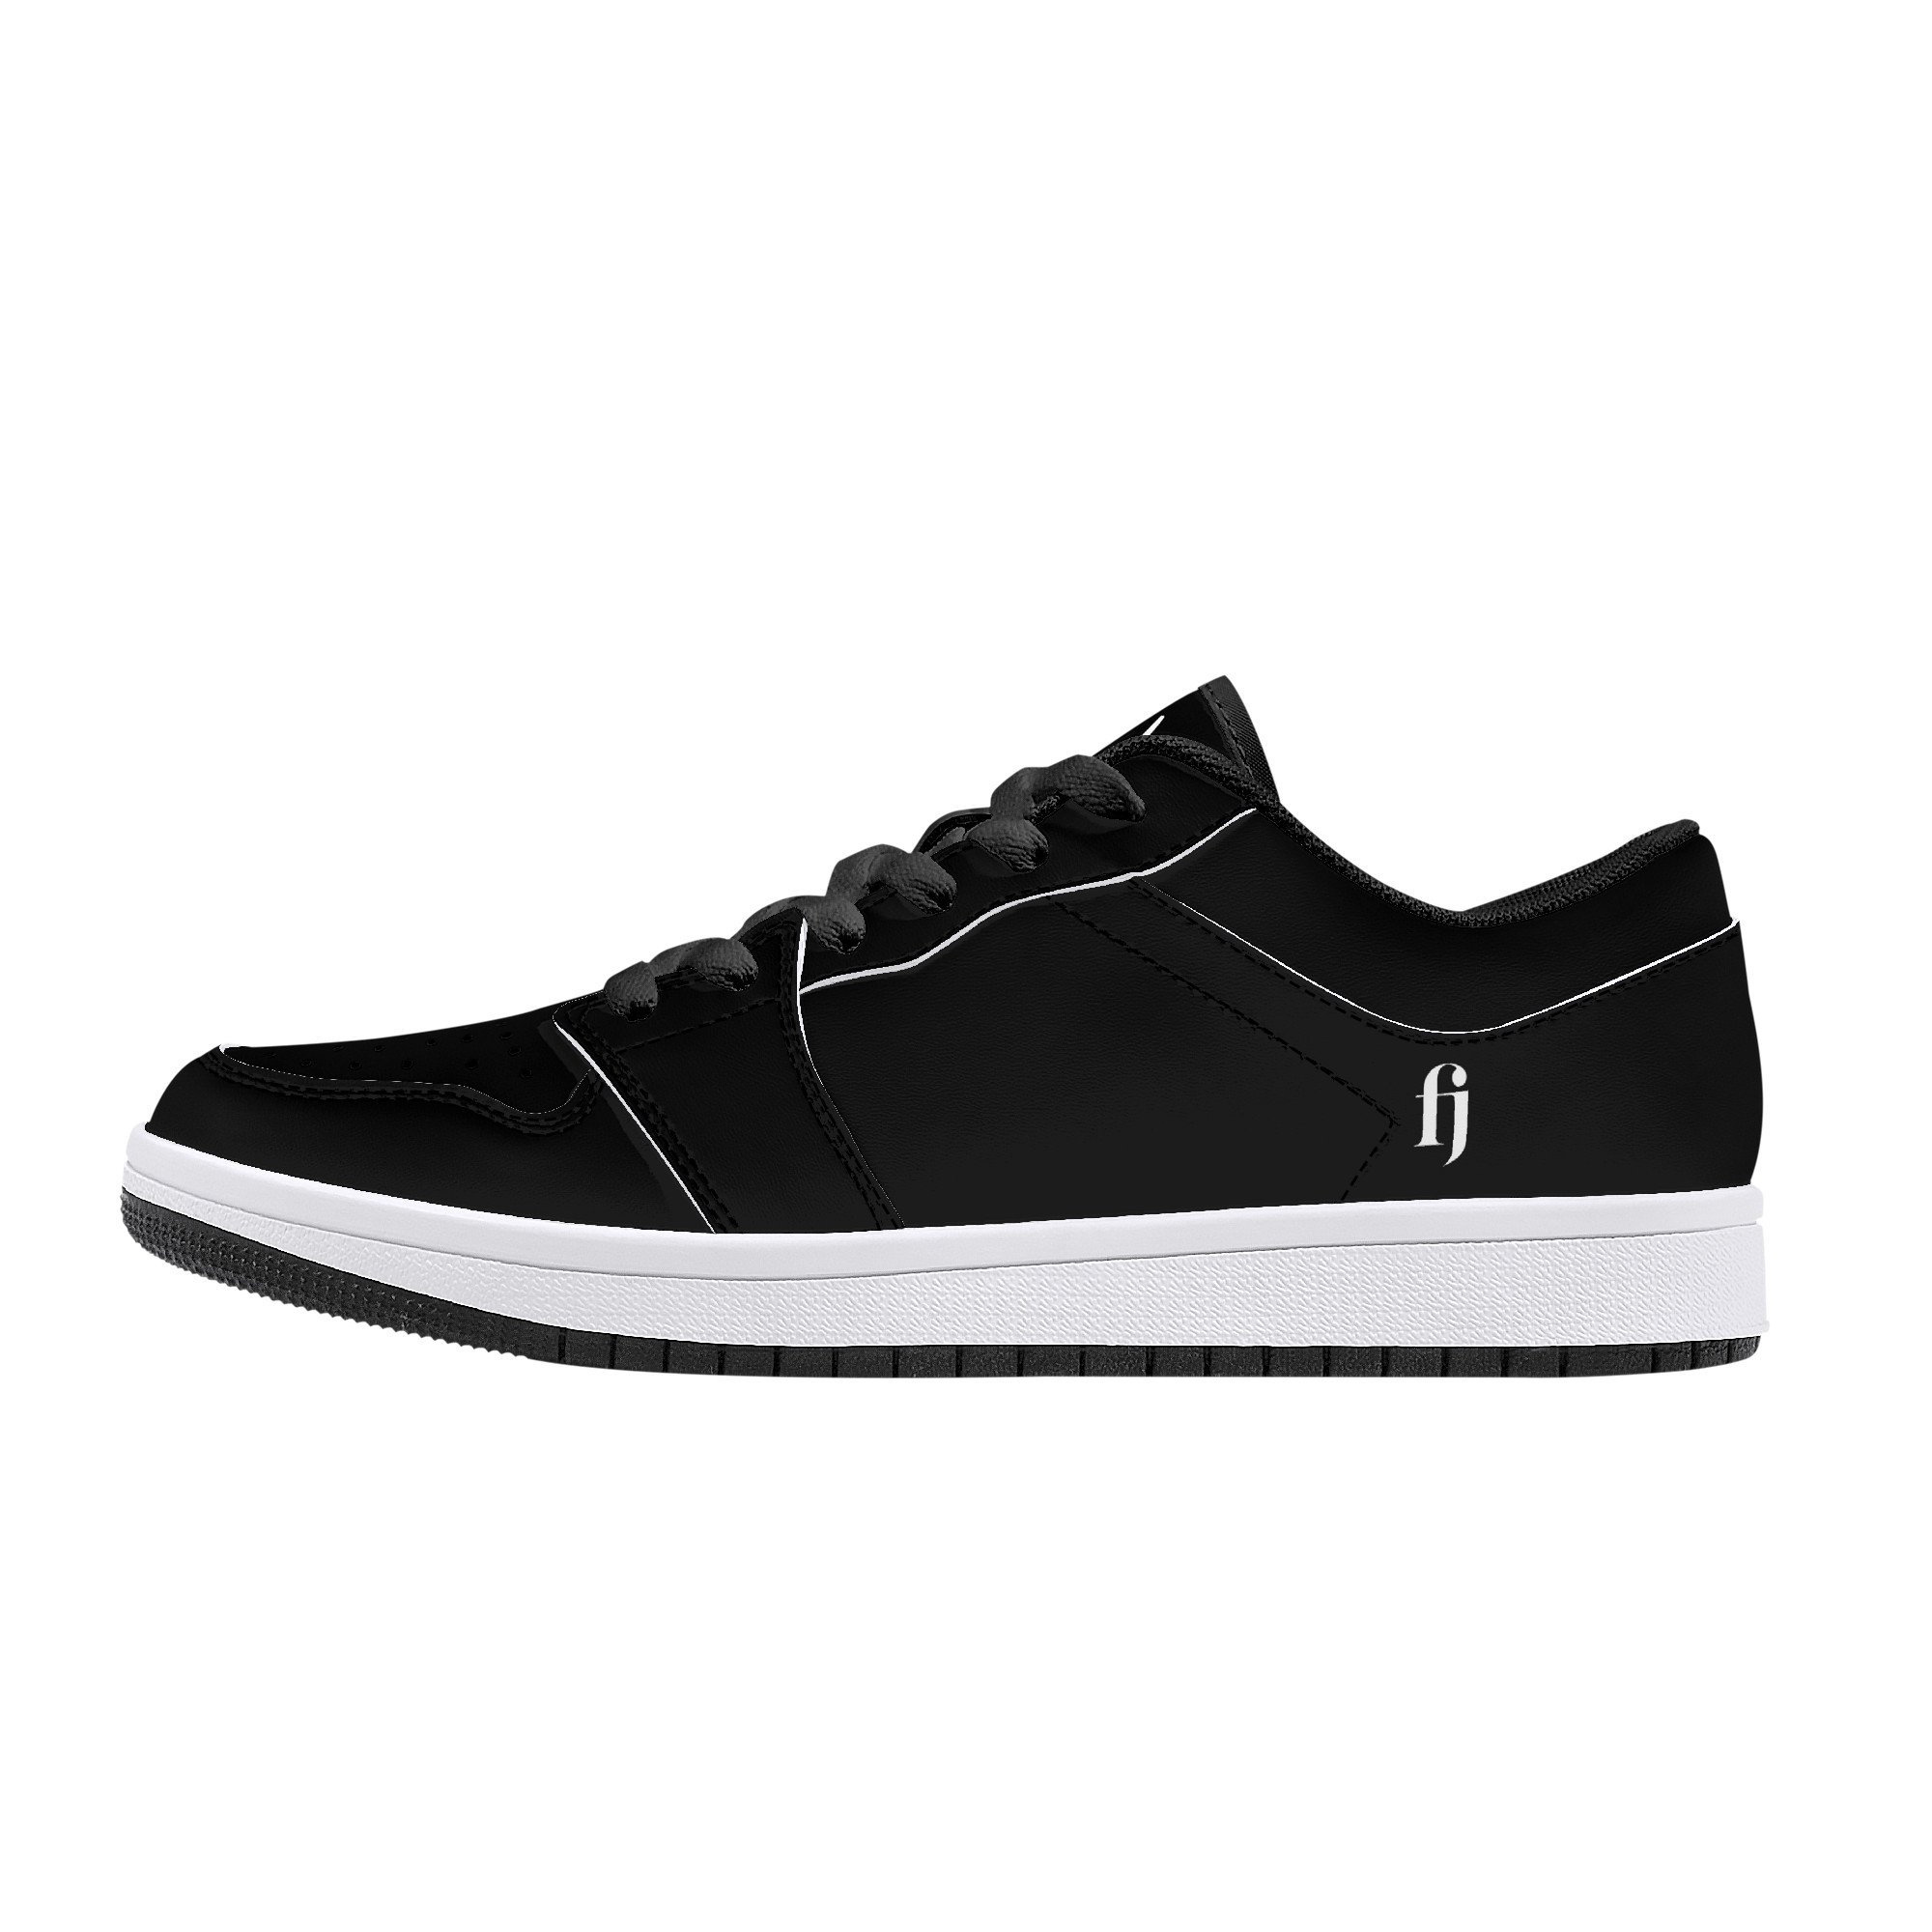 Fred Jo All Black Low-Top Leather Sneakers - Fred jo Clothing